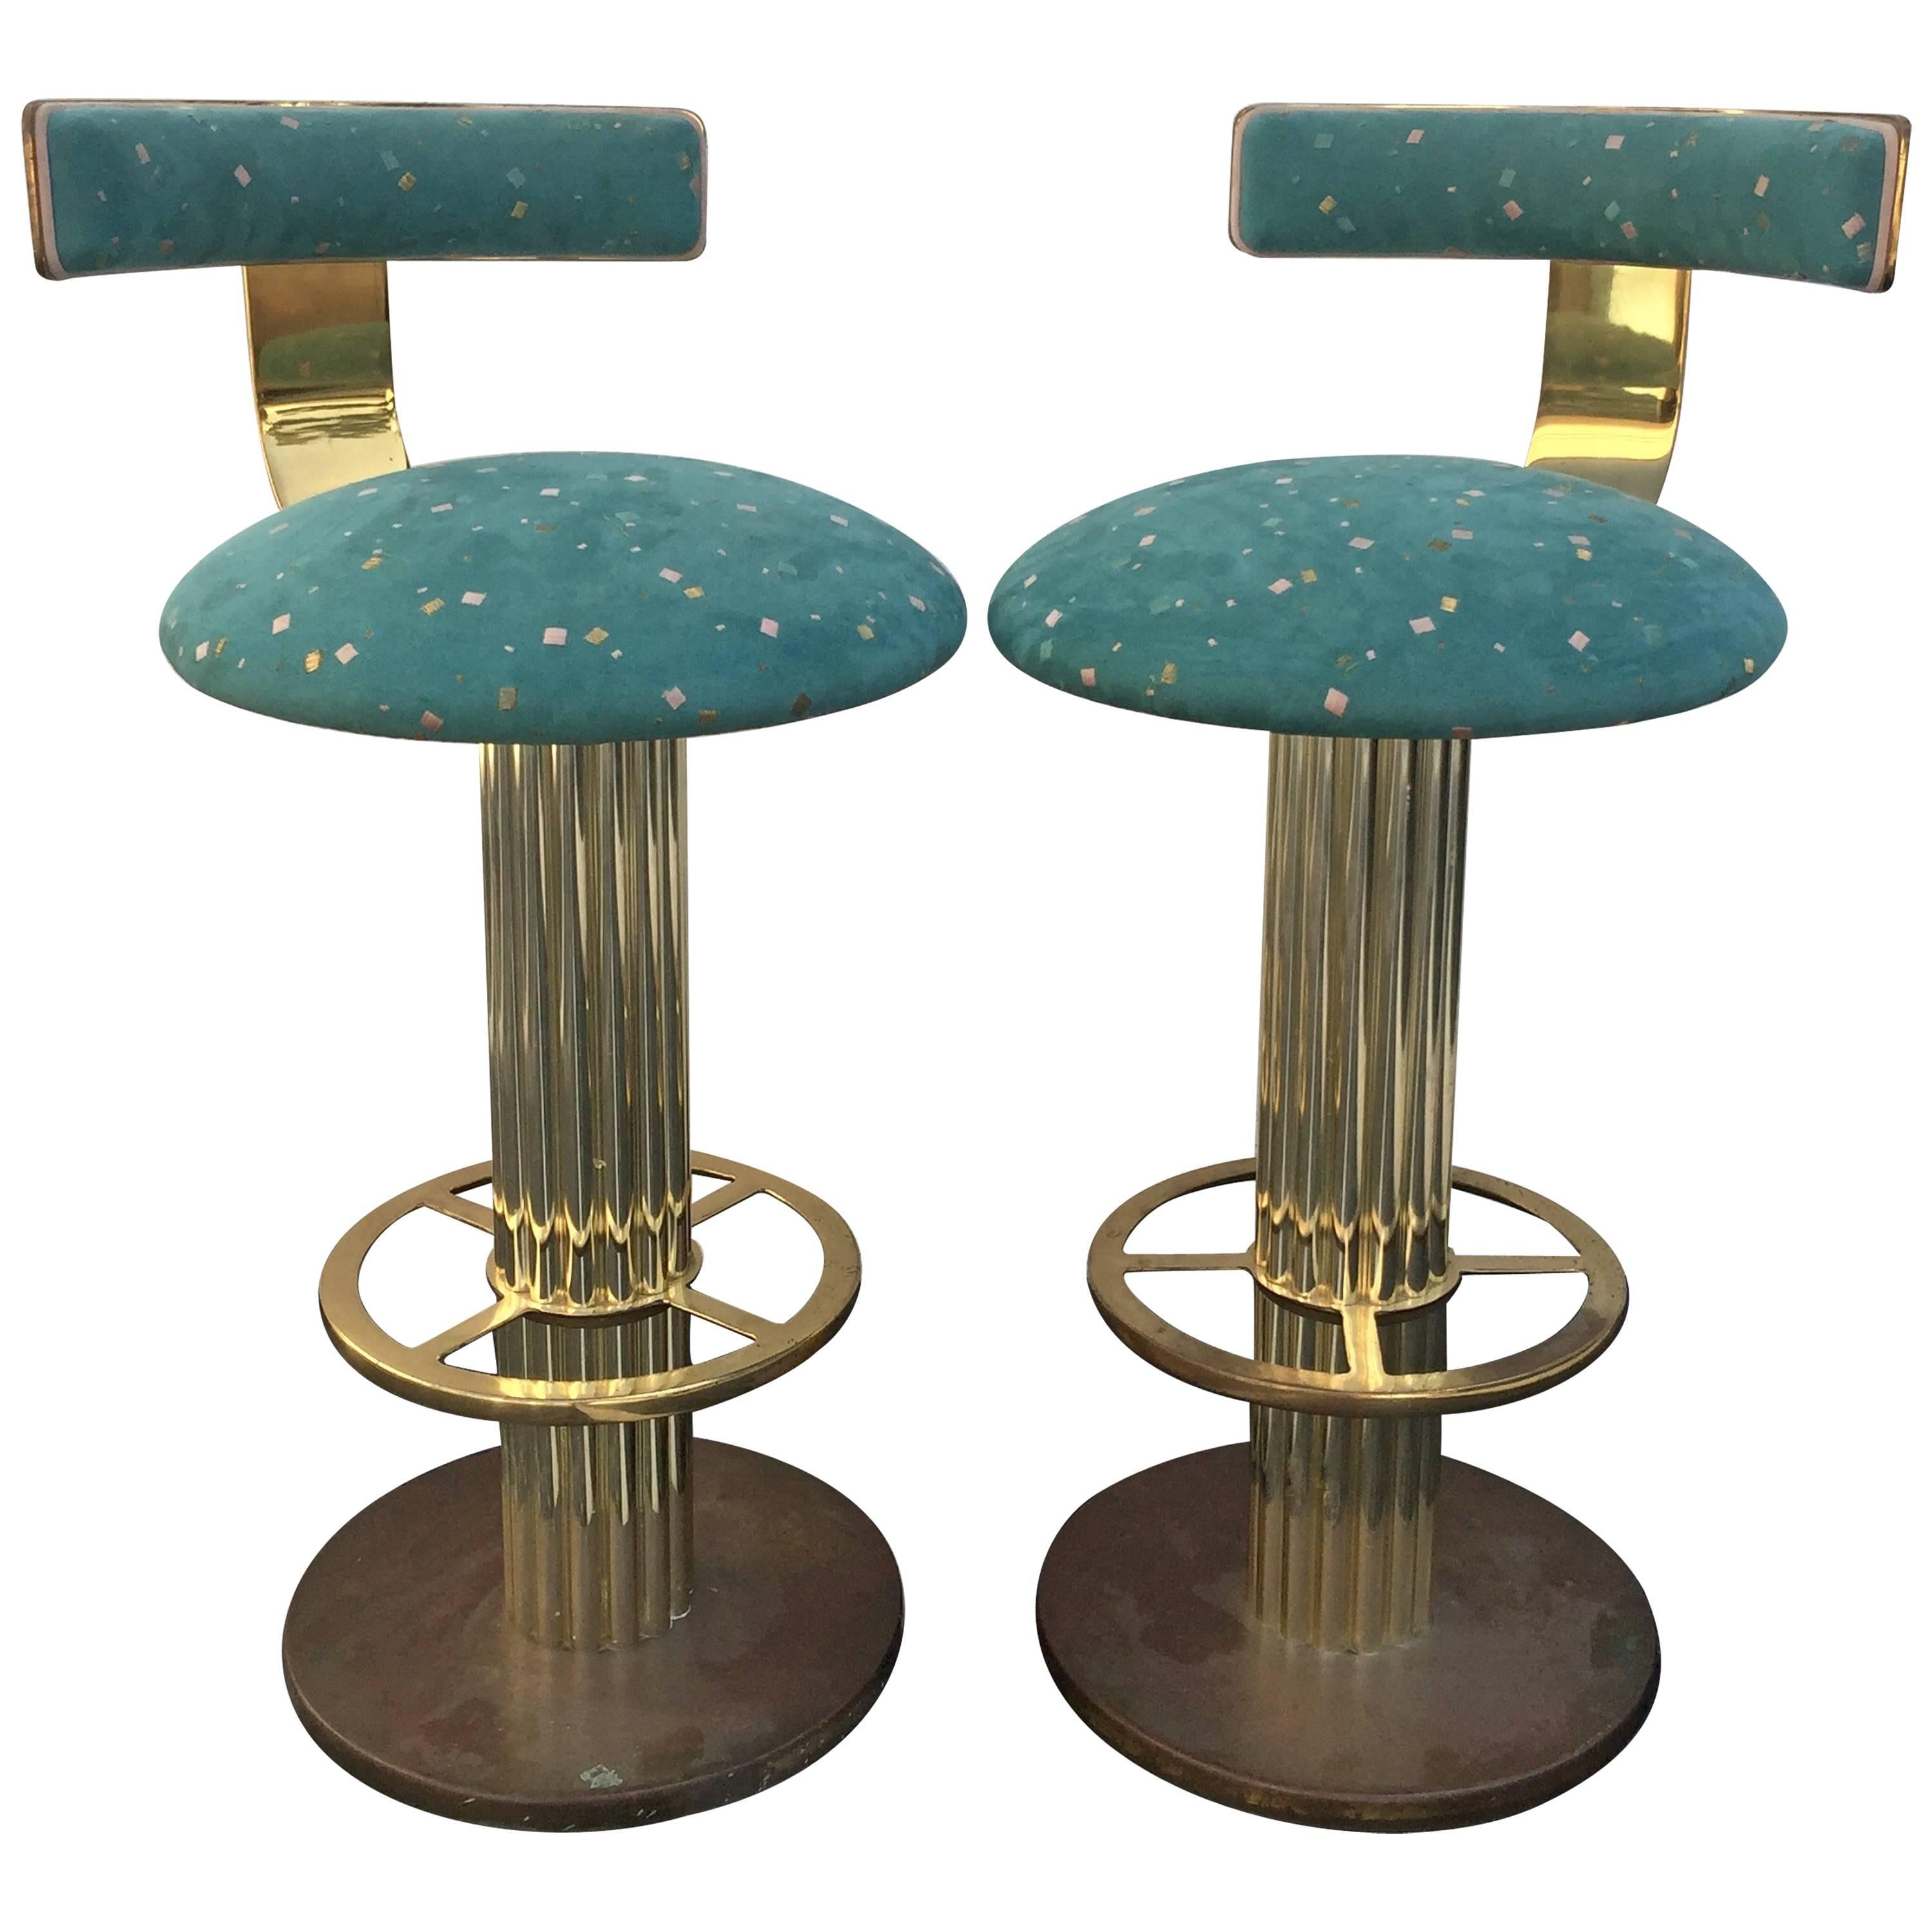 Pair of 'Excalibur' Brass Bar Stools by Design For Leisure